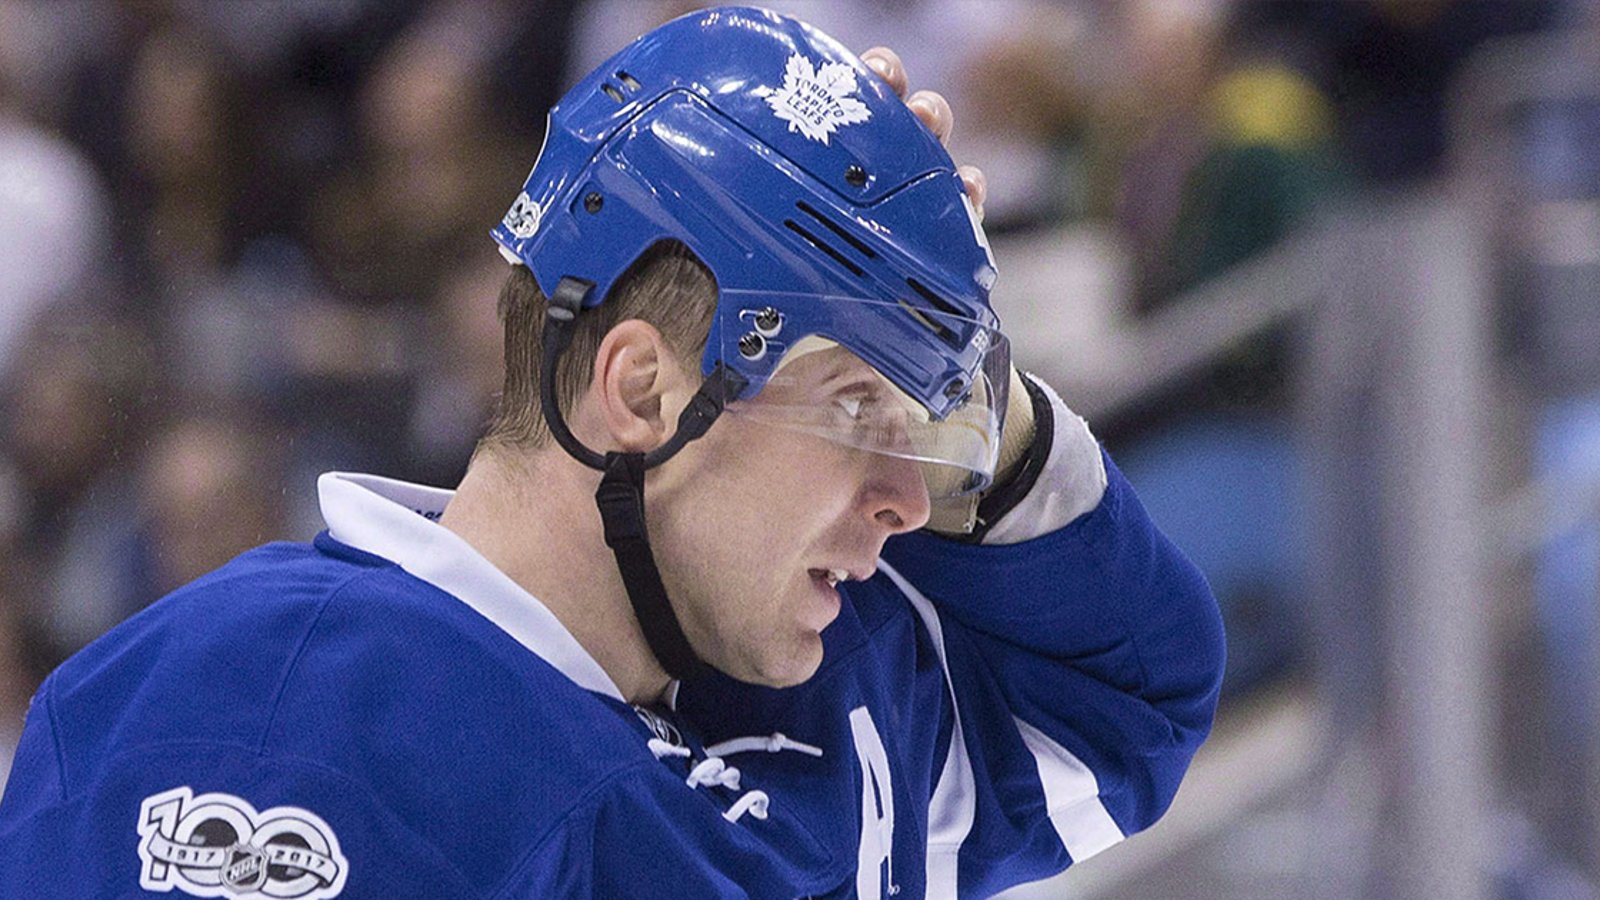 Report: How close are the Leafs to trading Bozak or JVR?